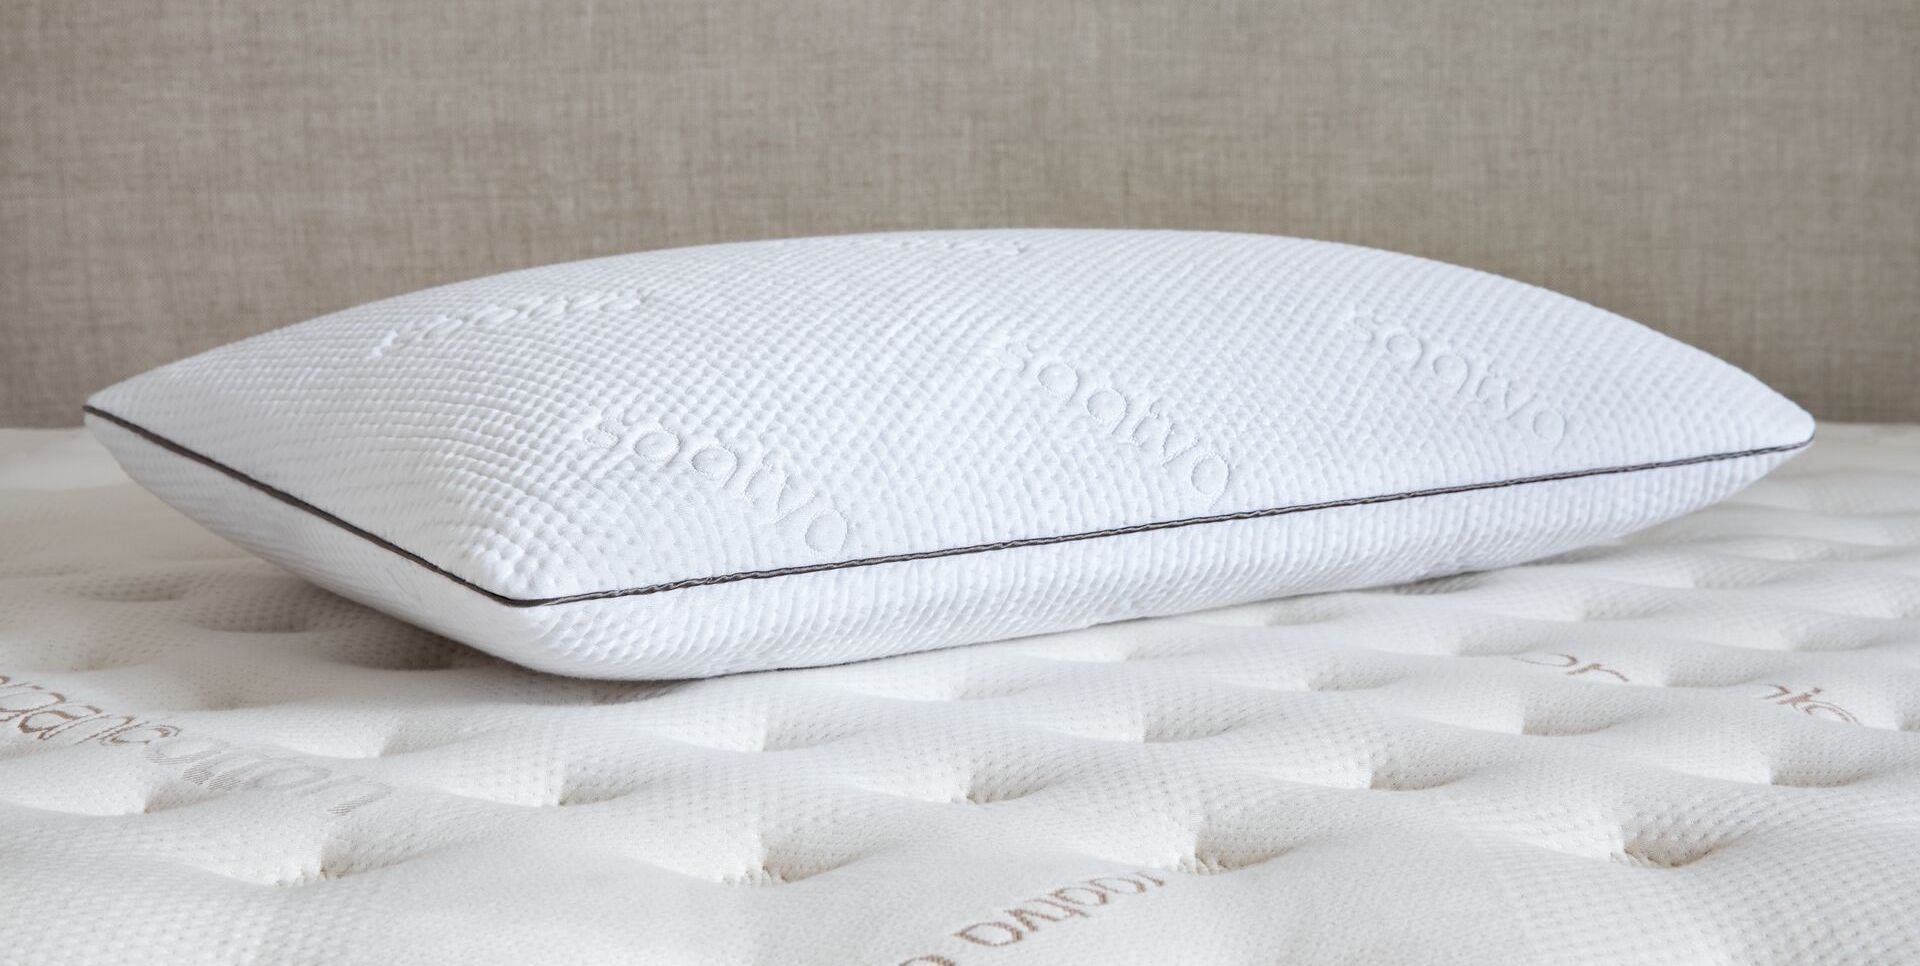 Sleeping Without a Pillow: Is It Good or Bad?